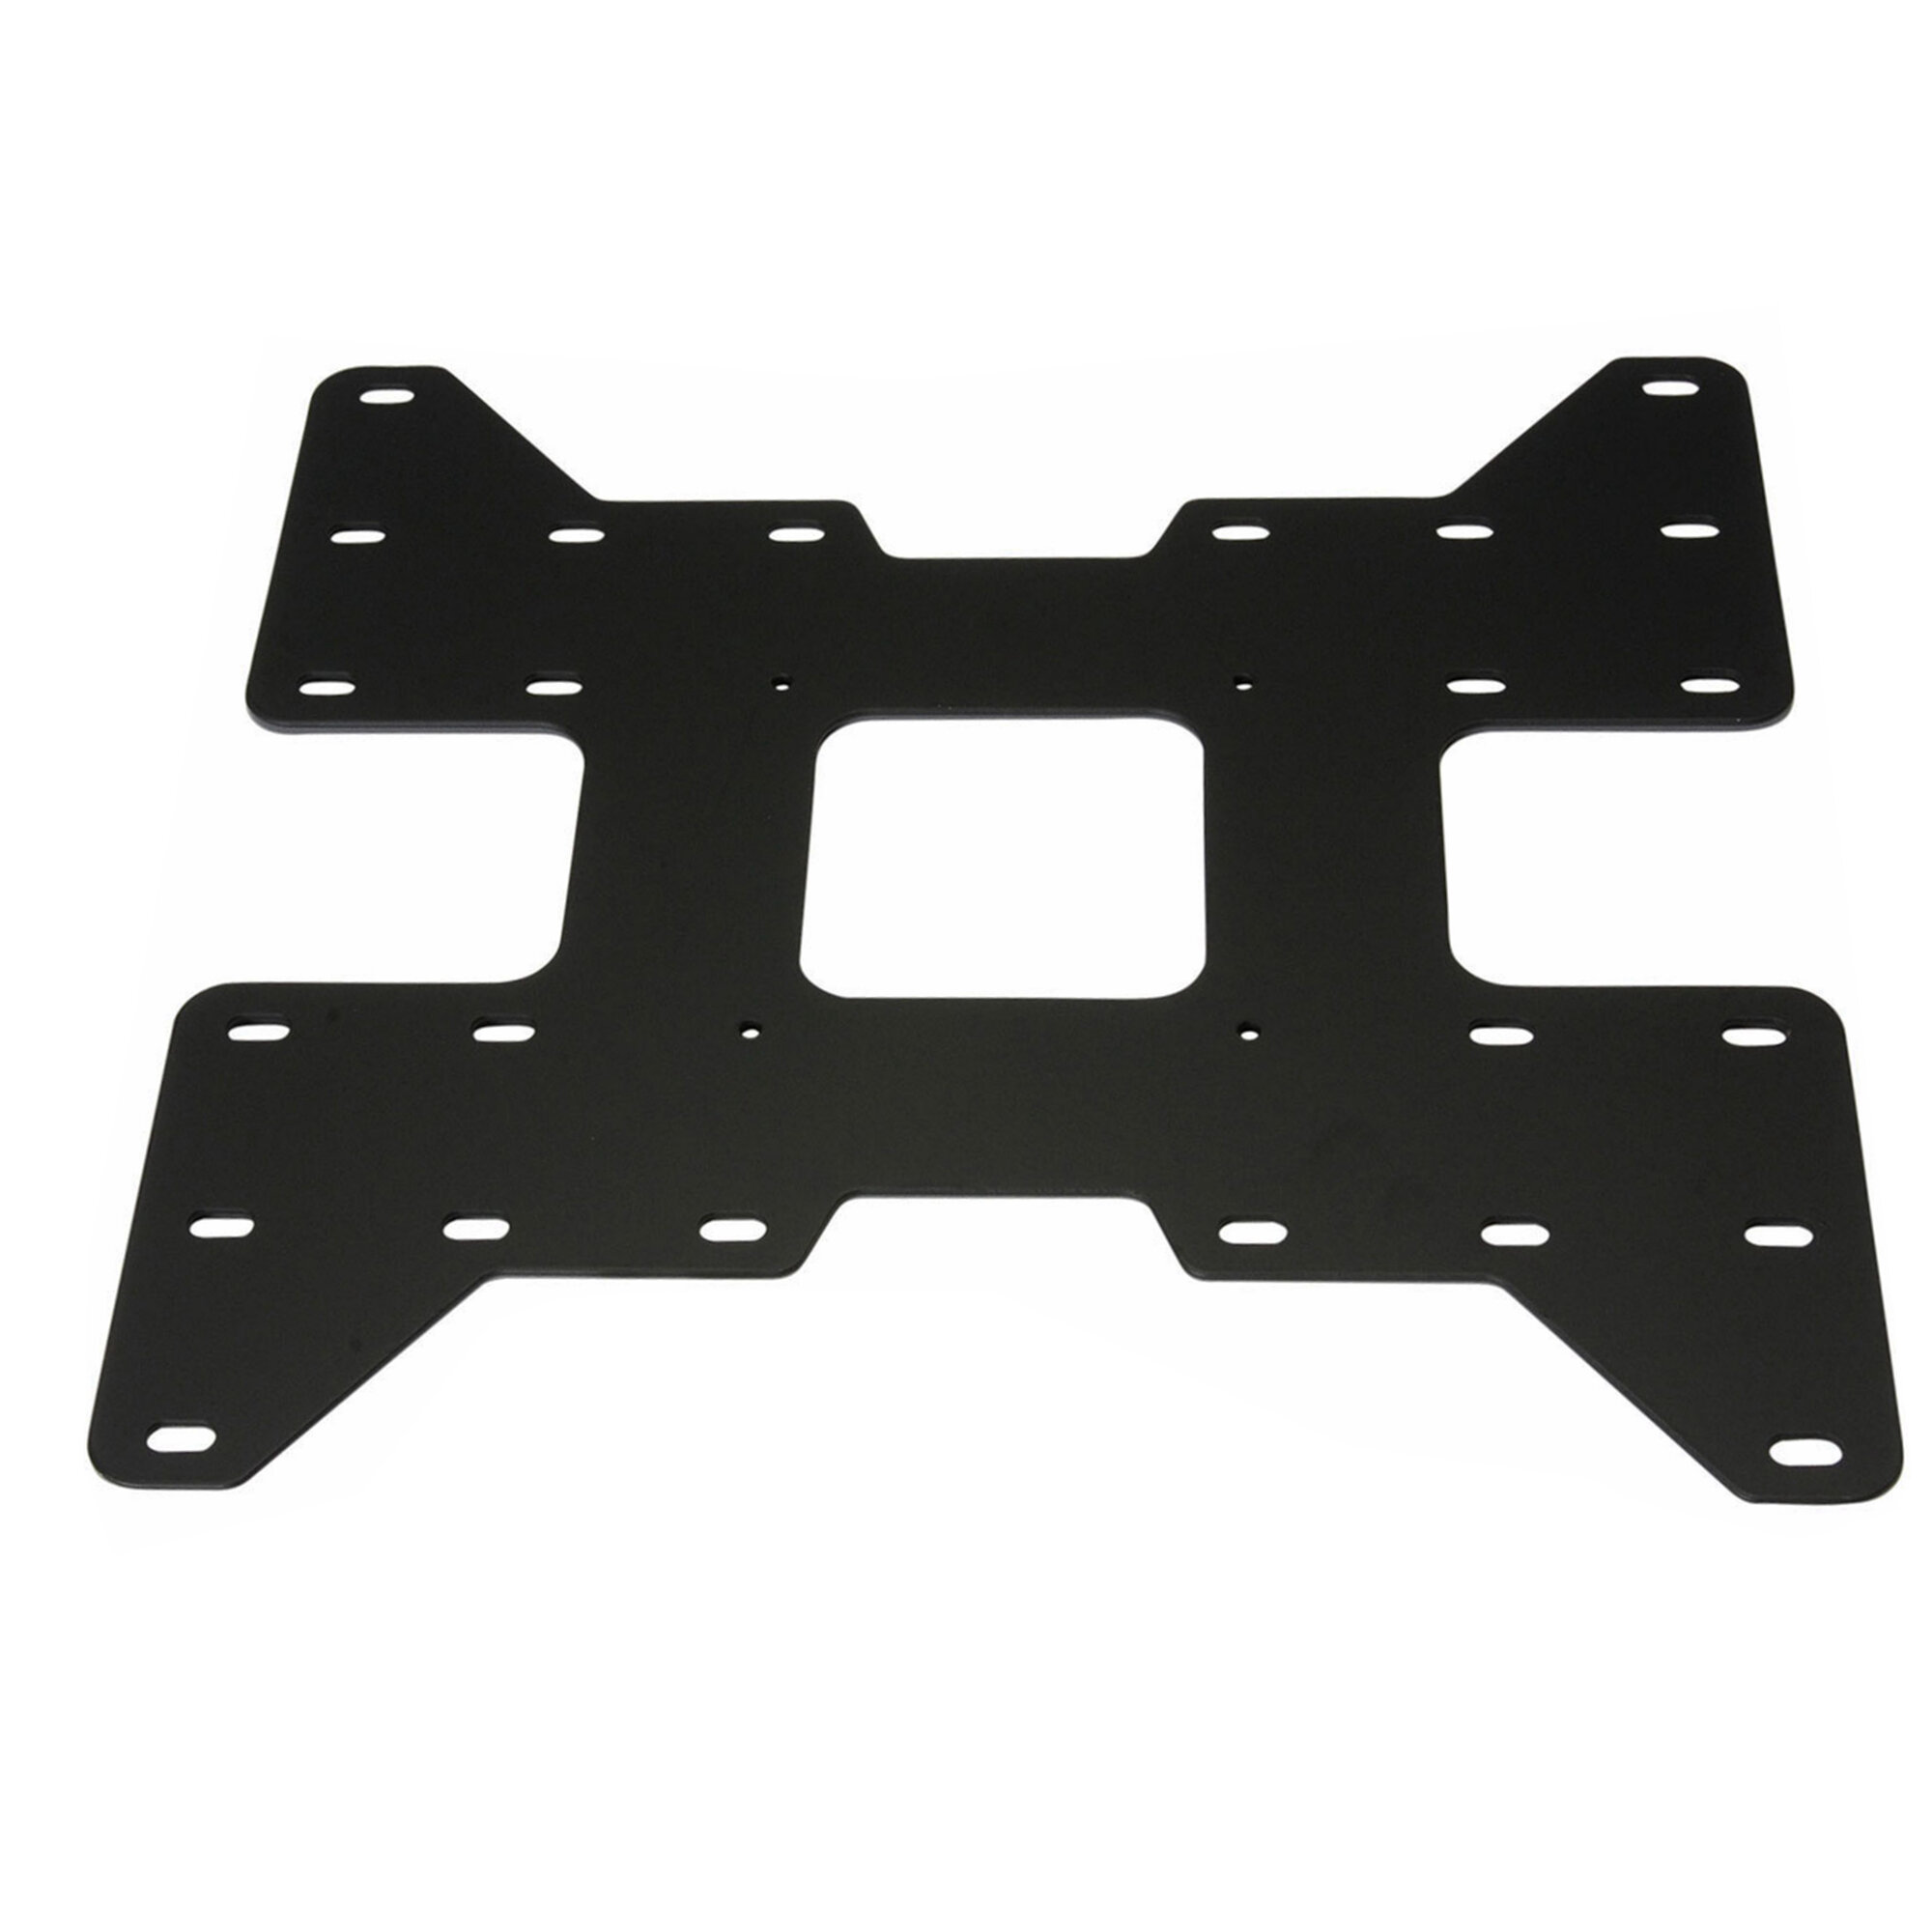 Homevision Technology Adapter Plate